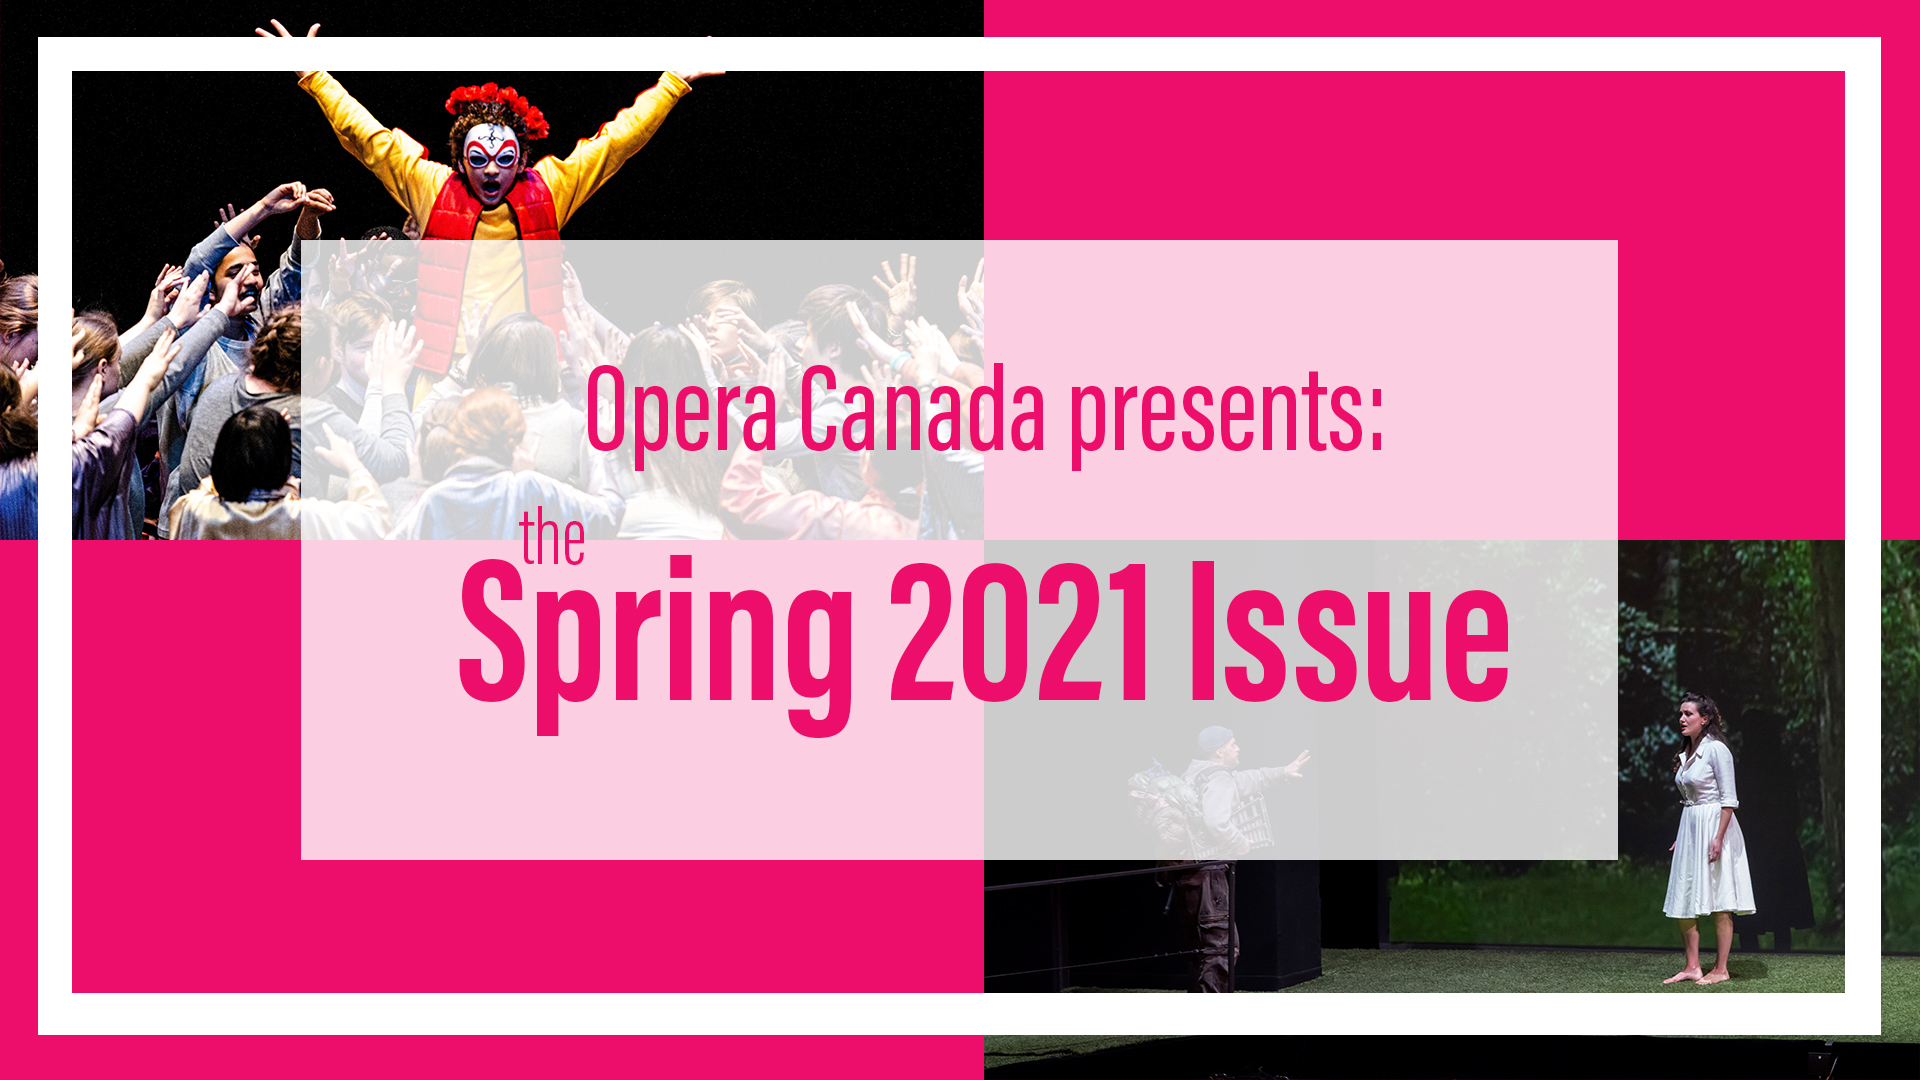 Announcing the spring 2021 issue